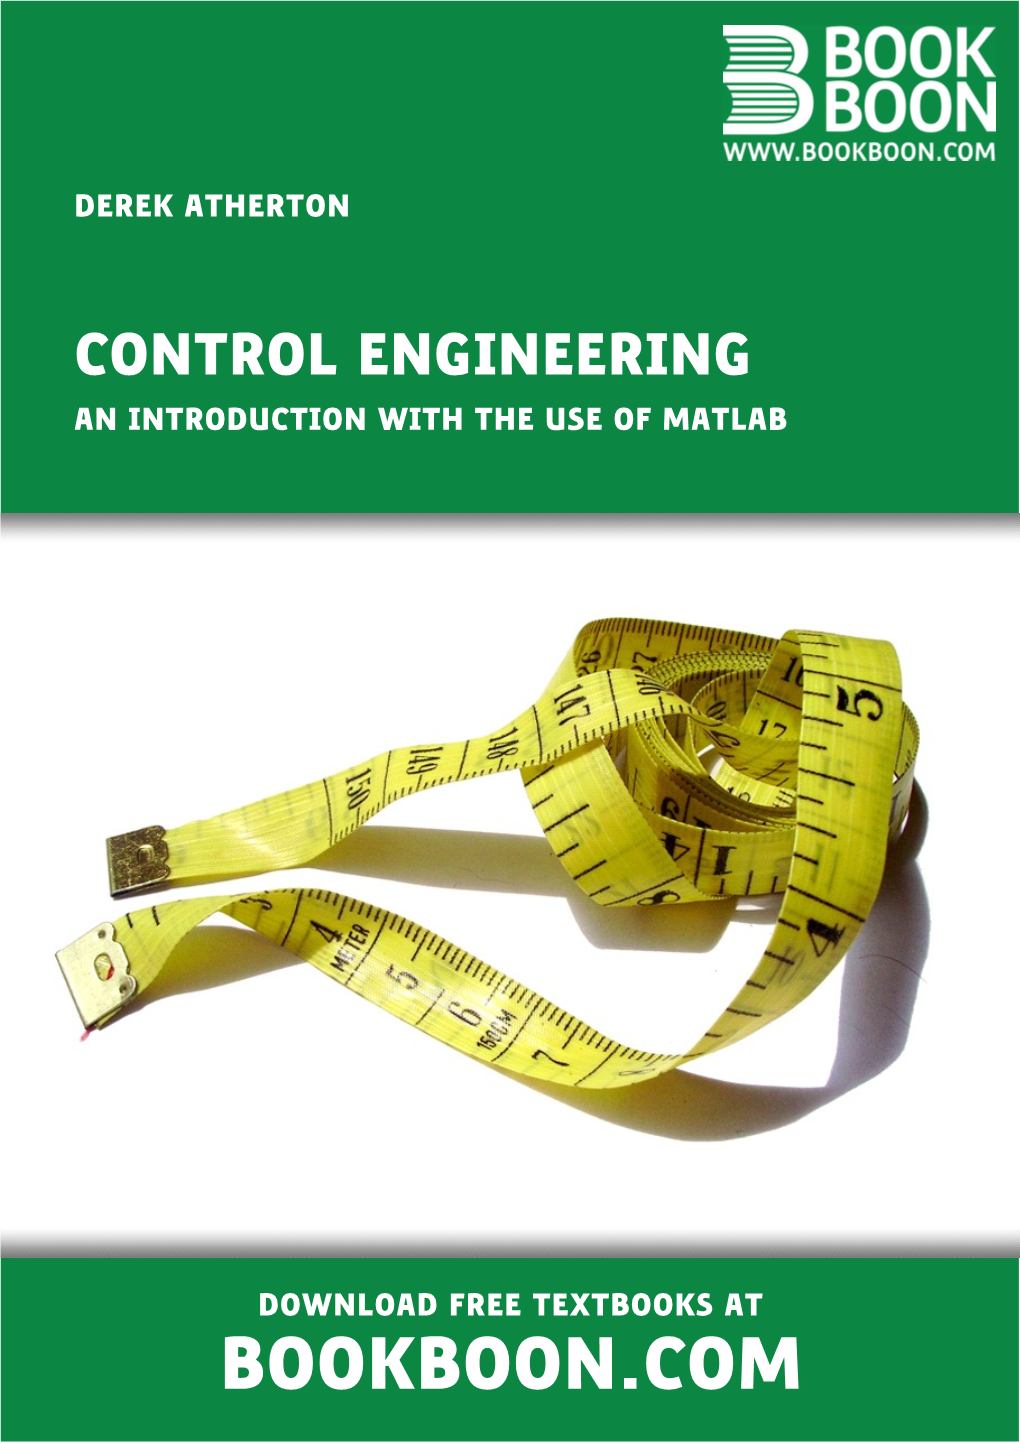 Control Engineering an Introduction with the Use of Matlab